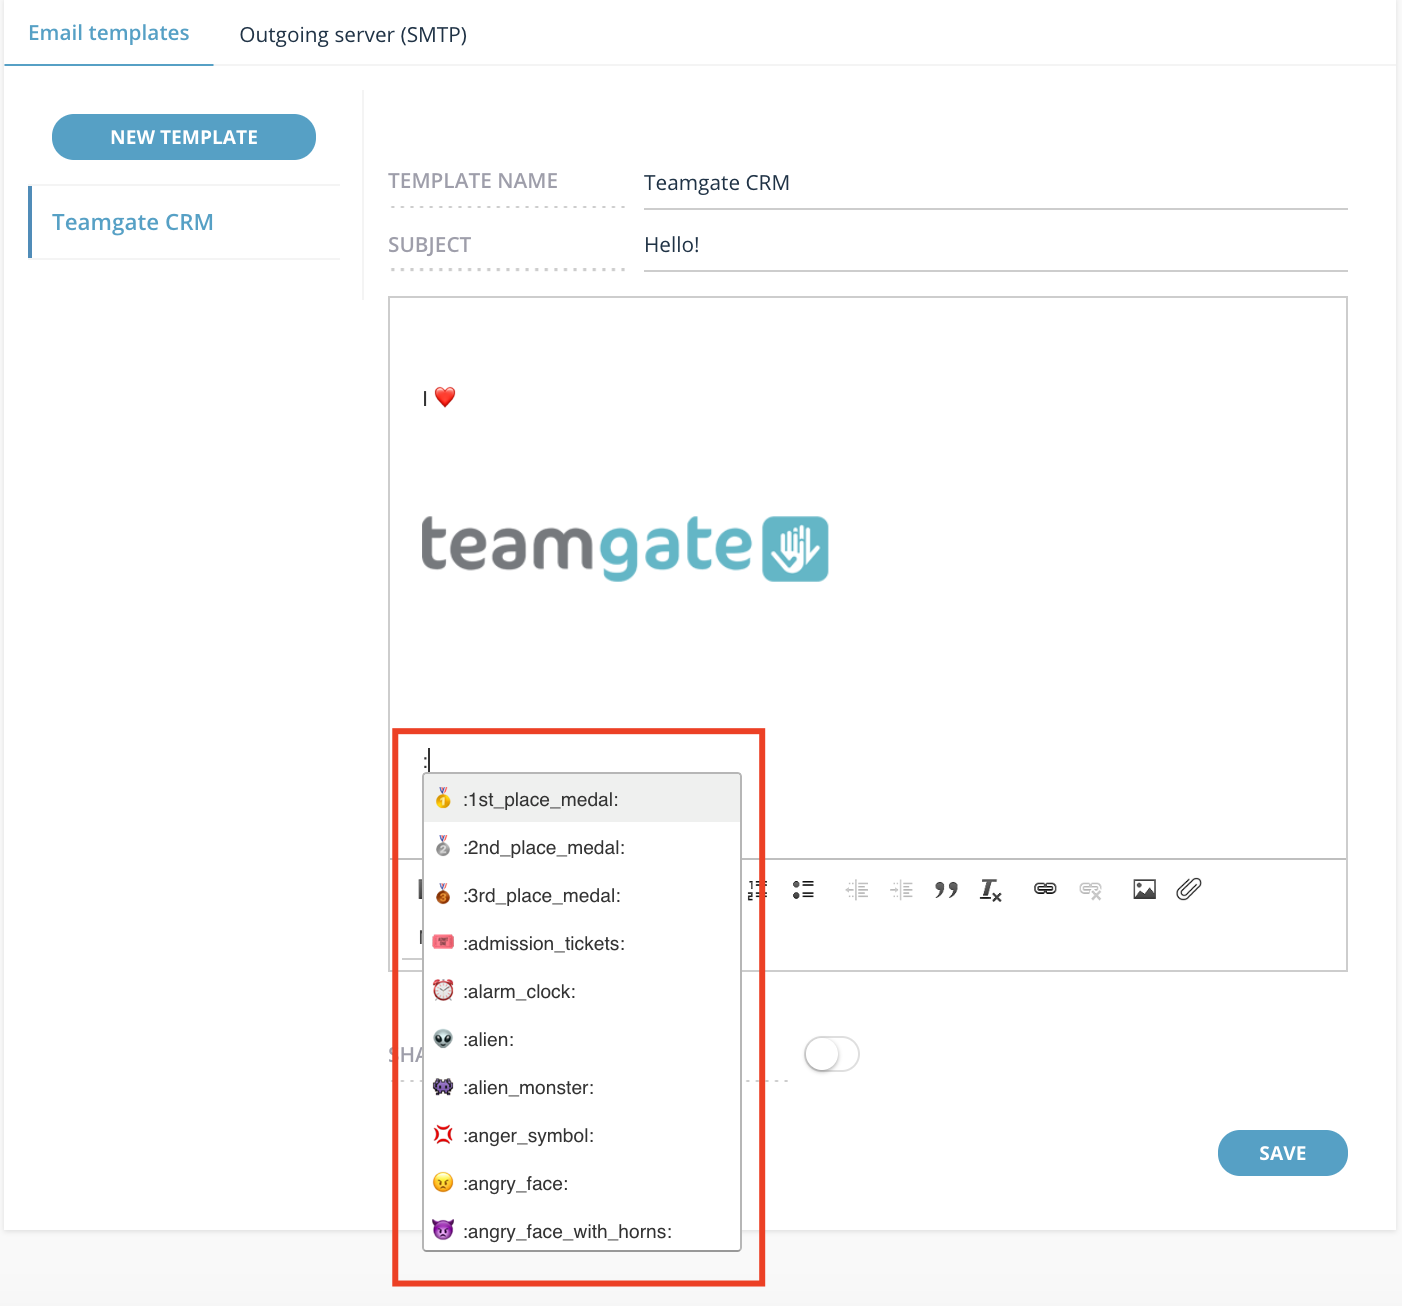 emojis-in-email-templates-Teamgate-CRM.png